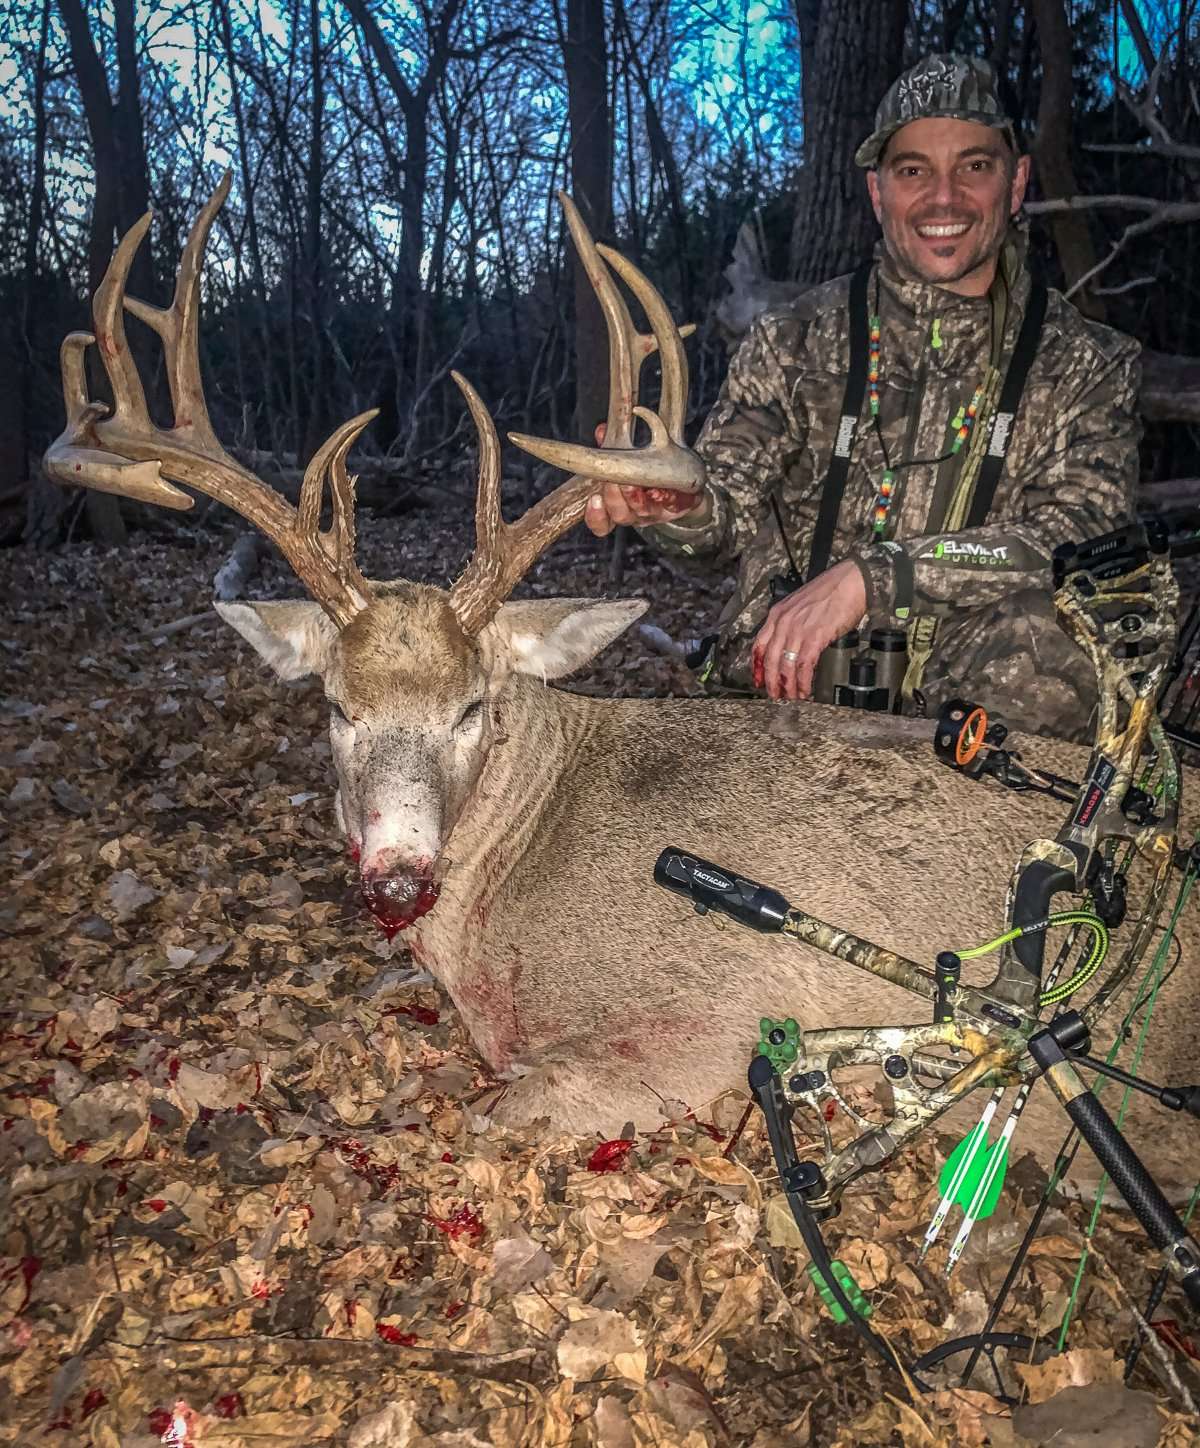 Mundt was all smiles after tagging his best buck ever. (Bone Collector photo)